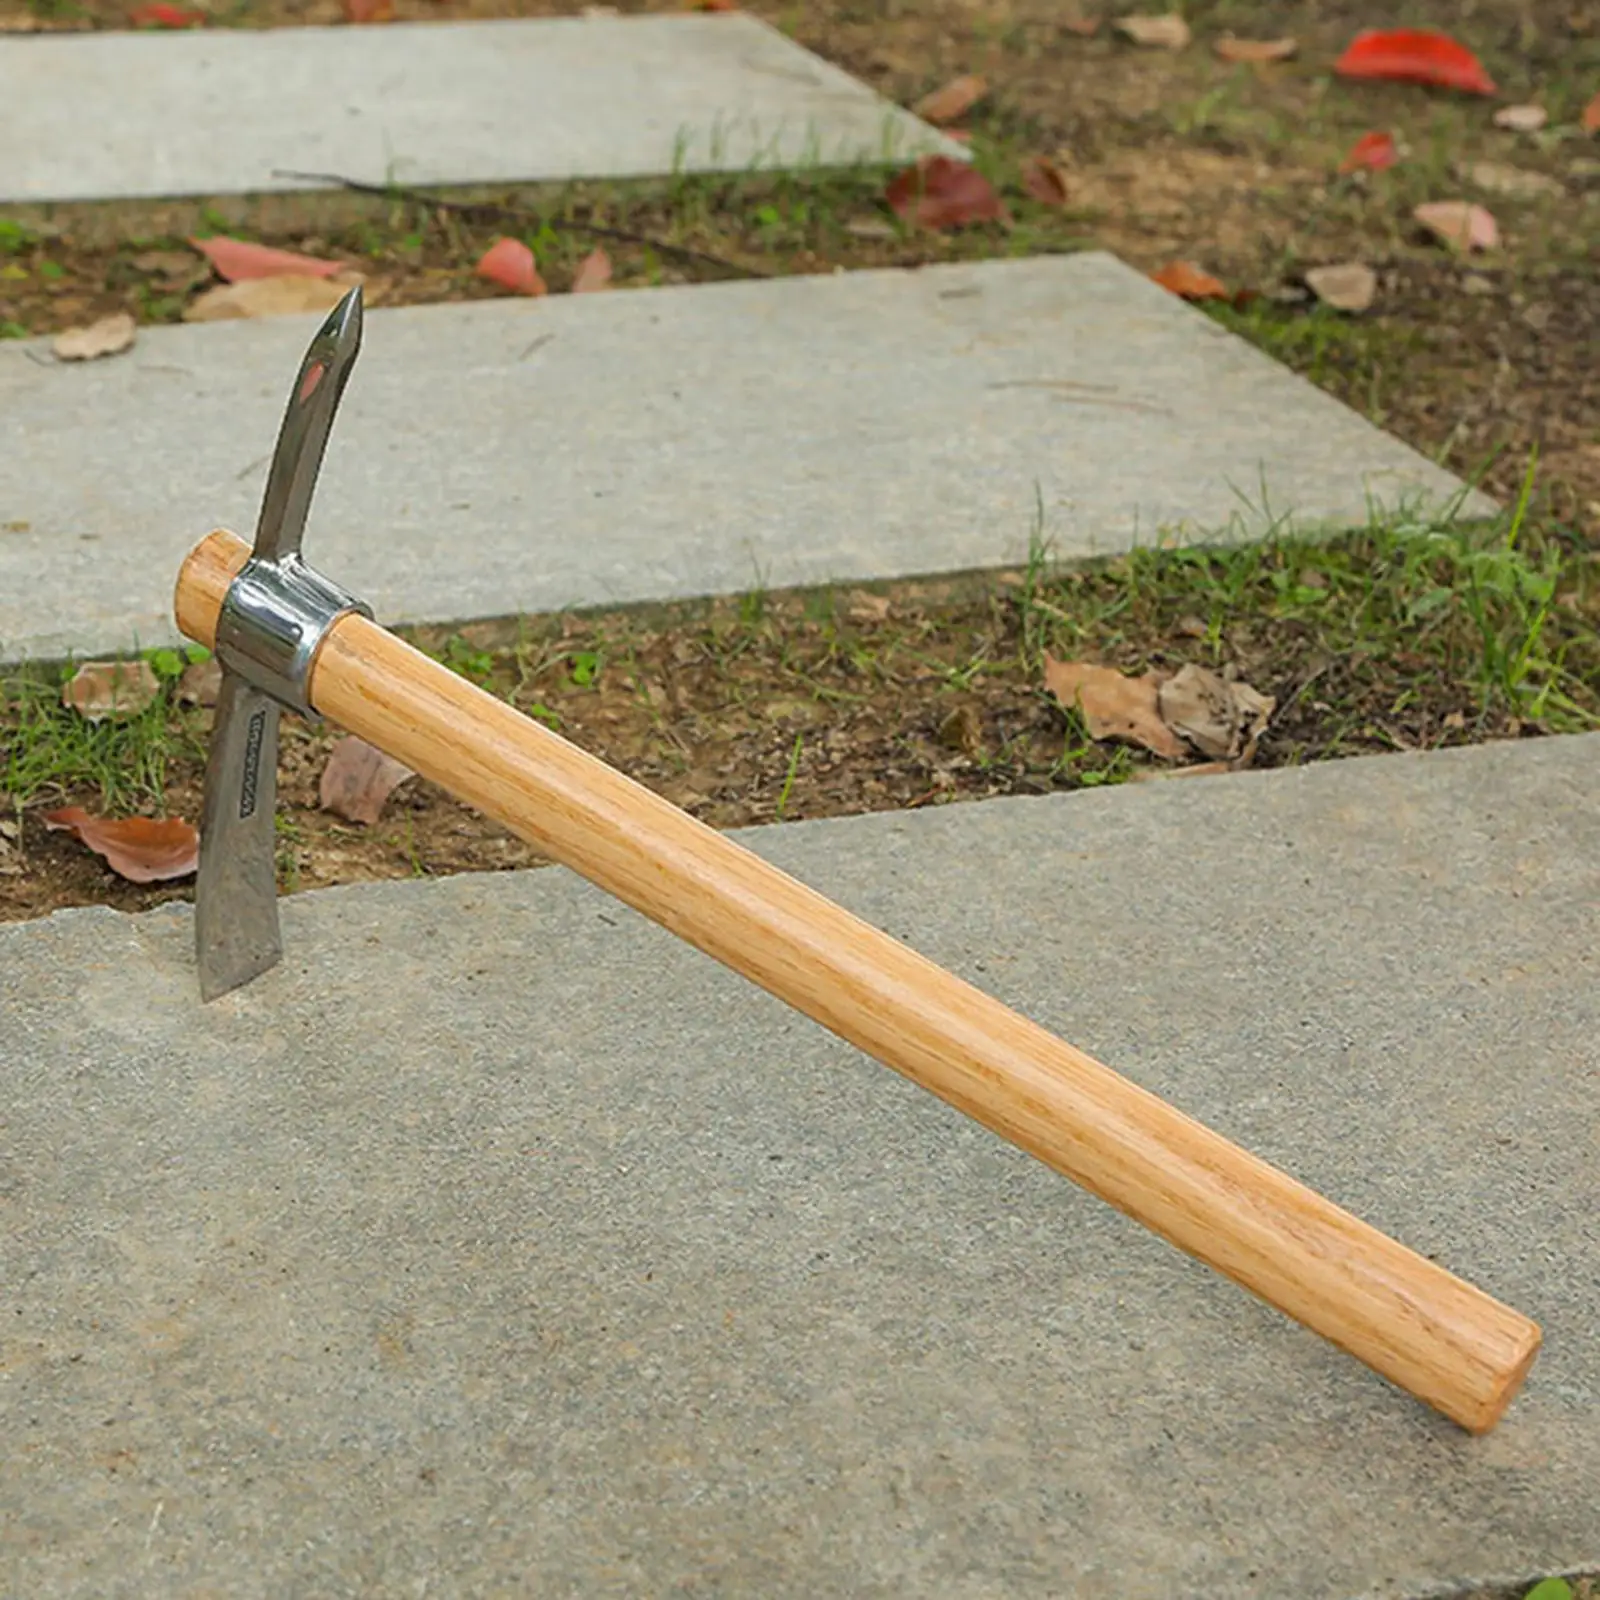 Ice Axe W/ Wooden Handle Pick Mattock Hoe for Loosening Soil